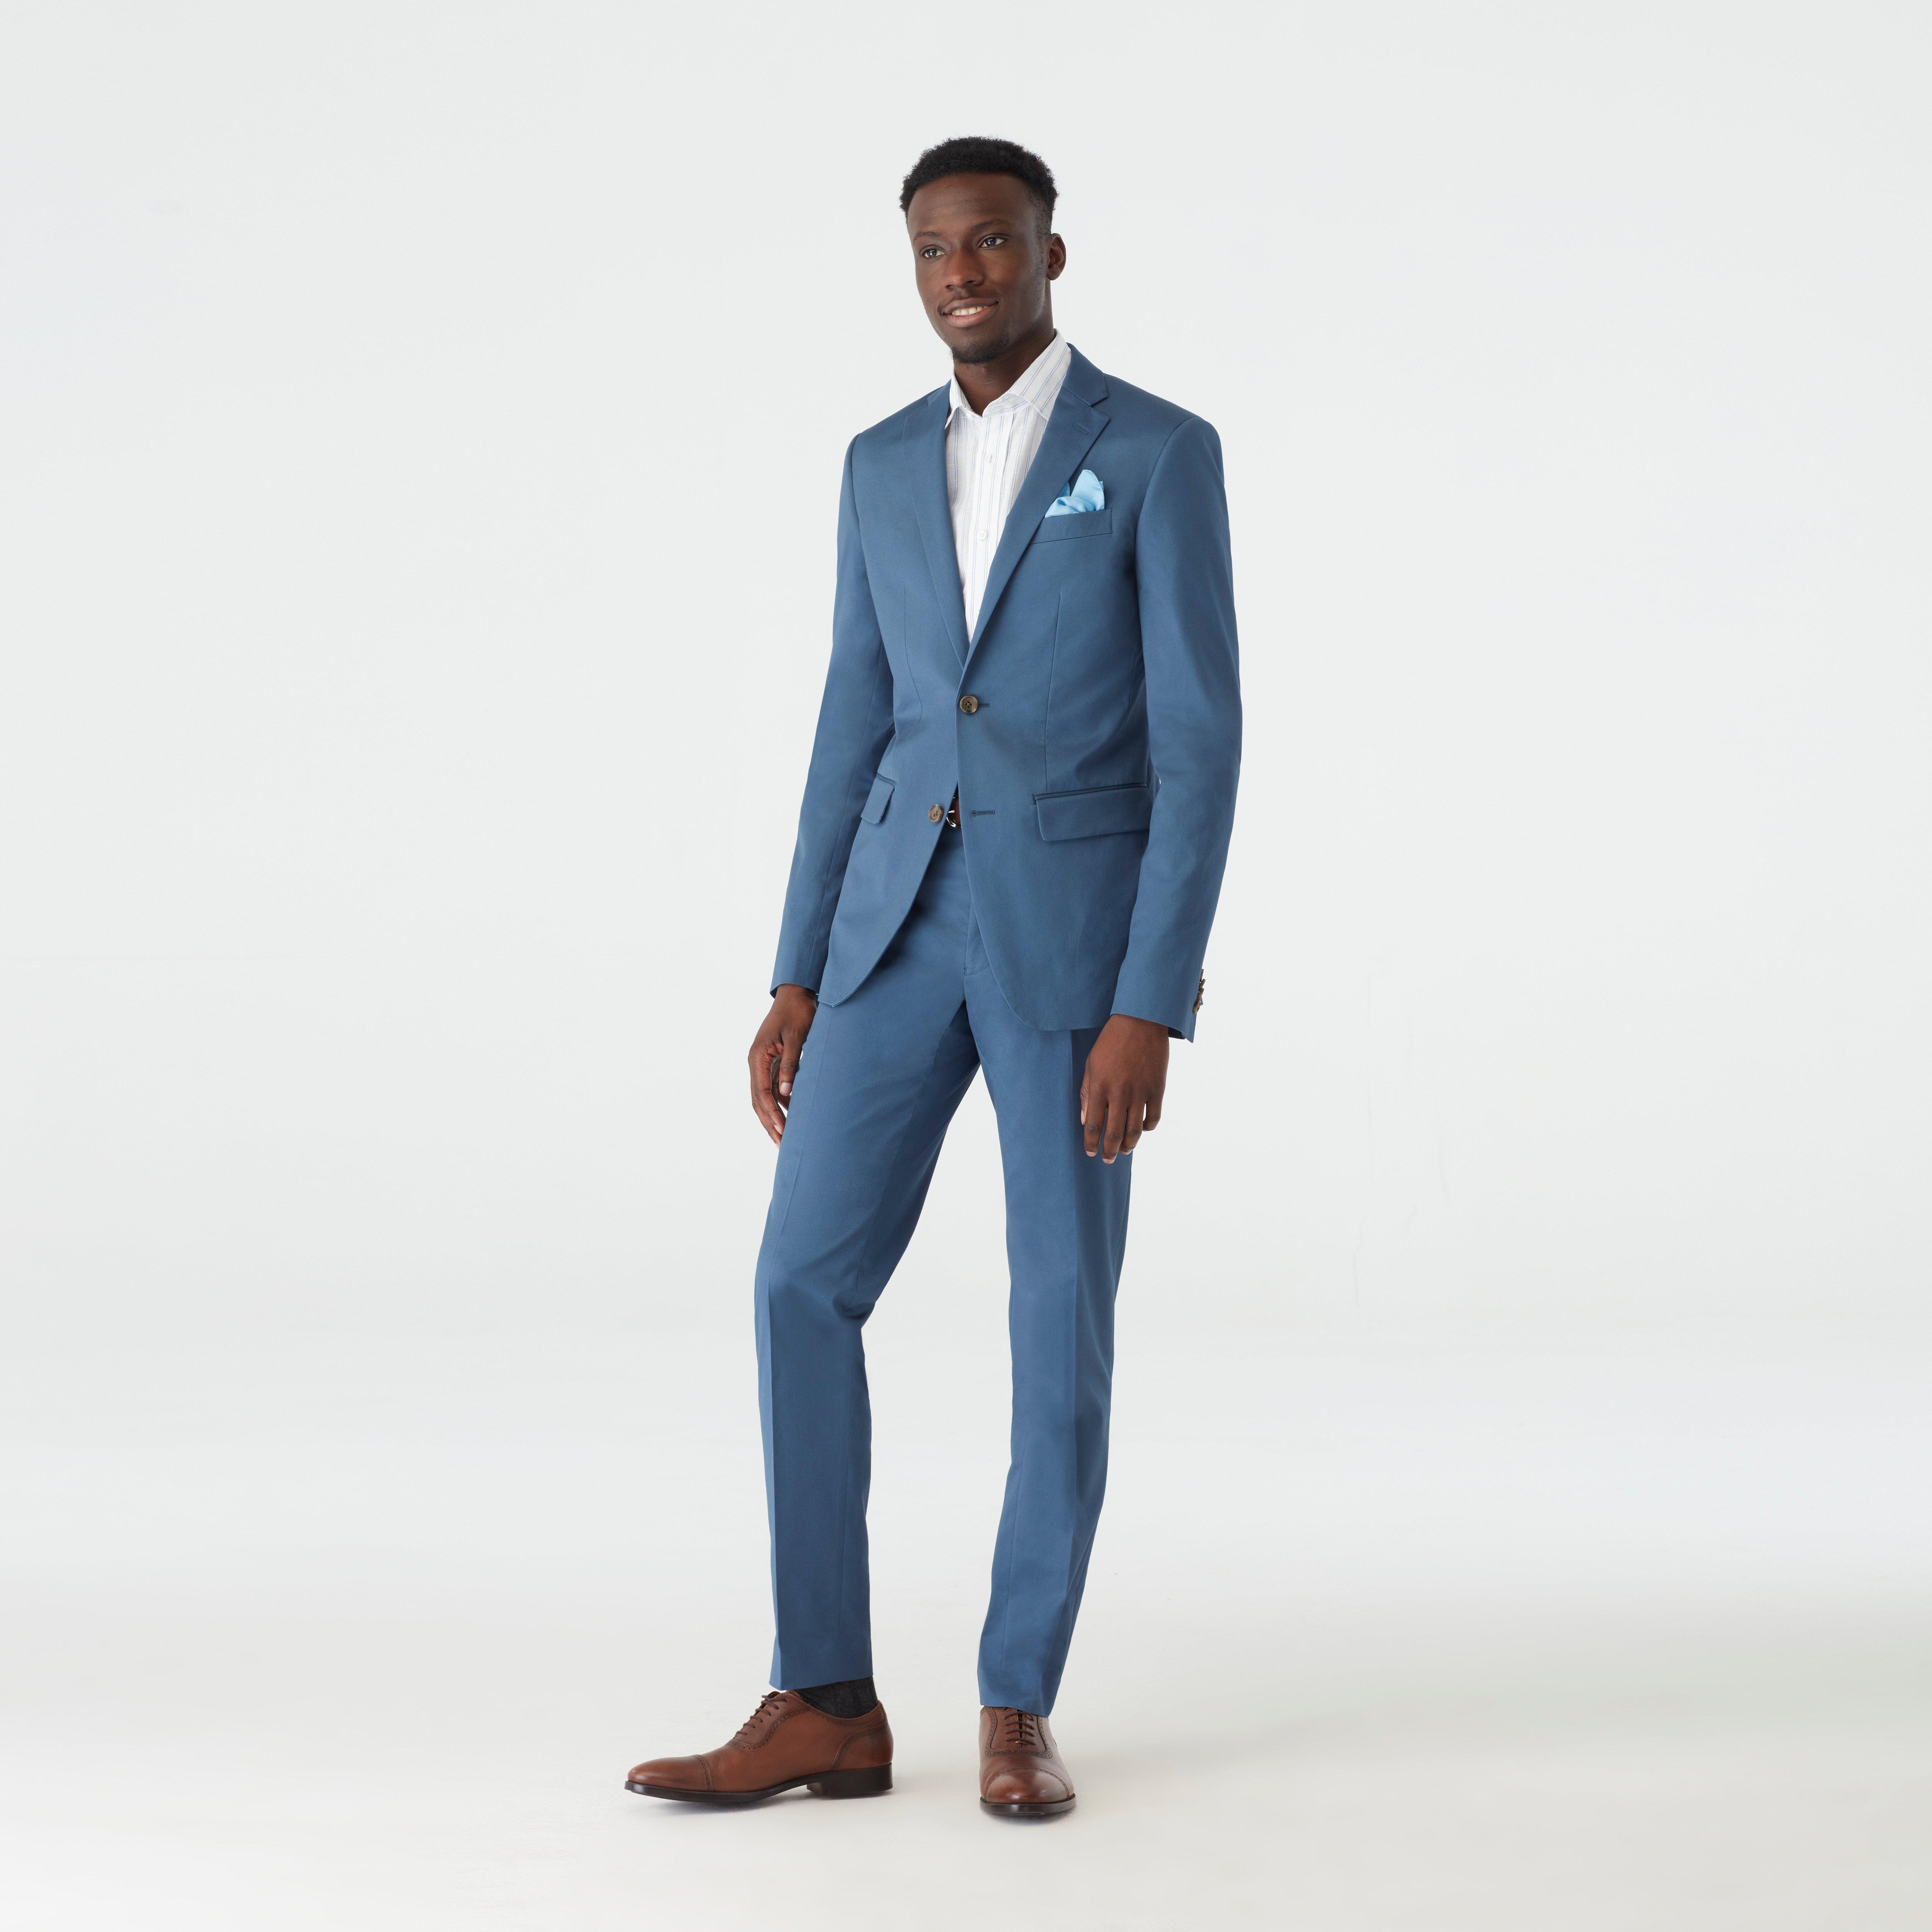 Navy Blue Tuxedo Pants  Suits for Weddings & Events